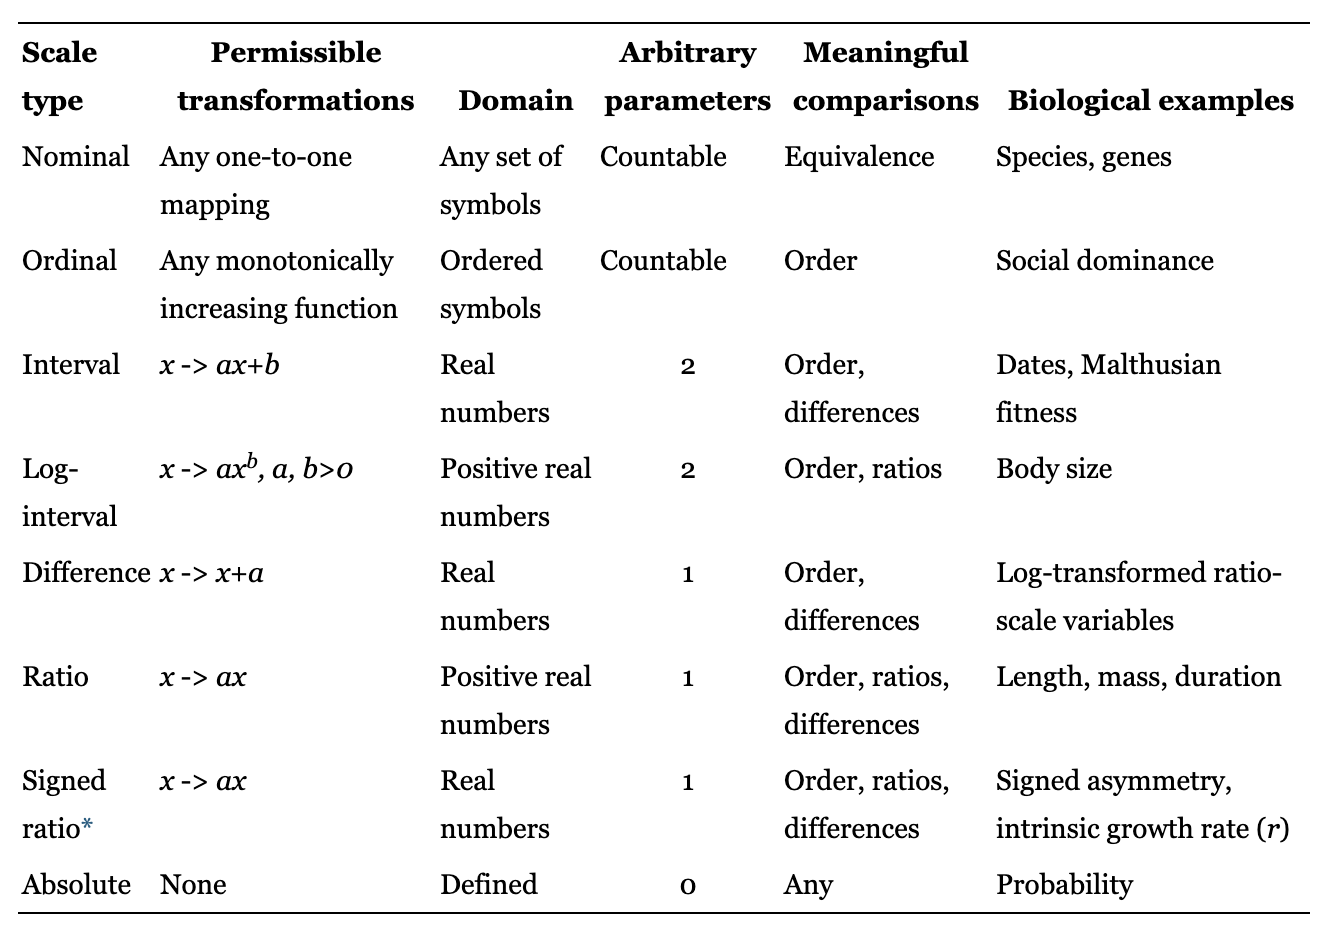 Characteristic Definition and Examples - Biology Online Dictionary